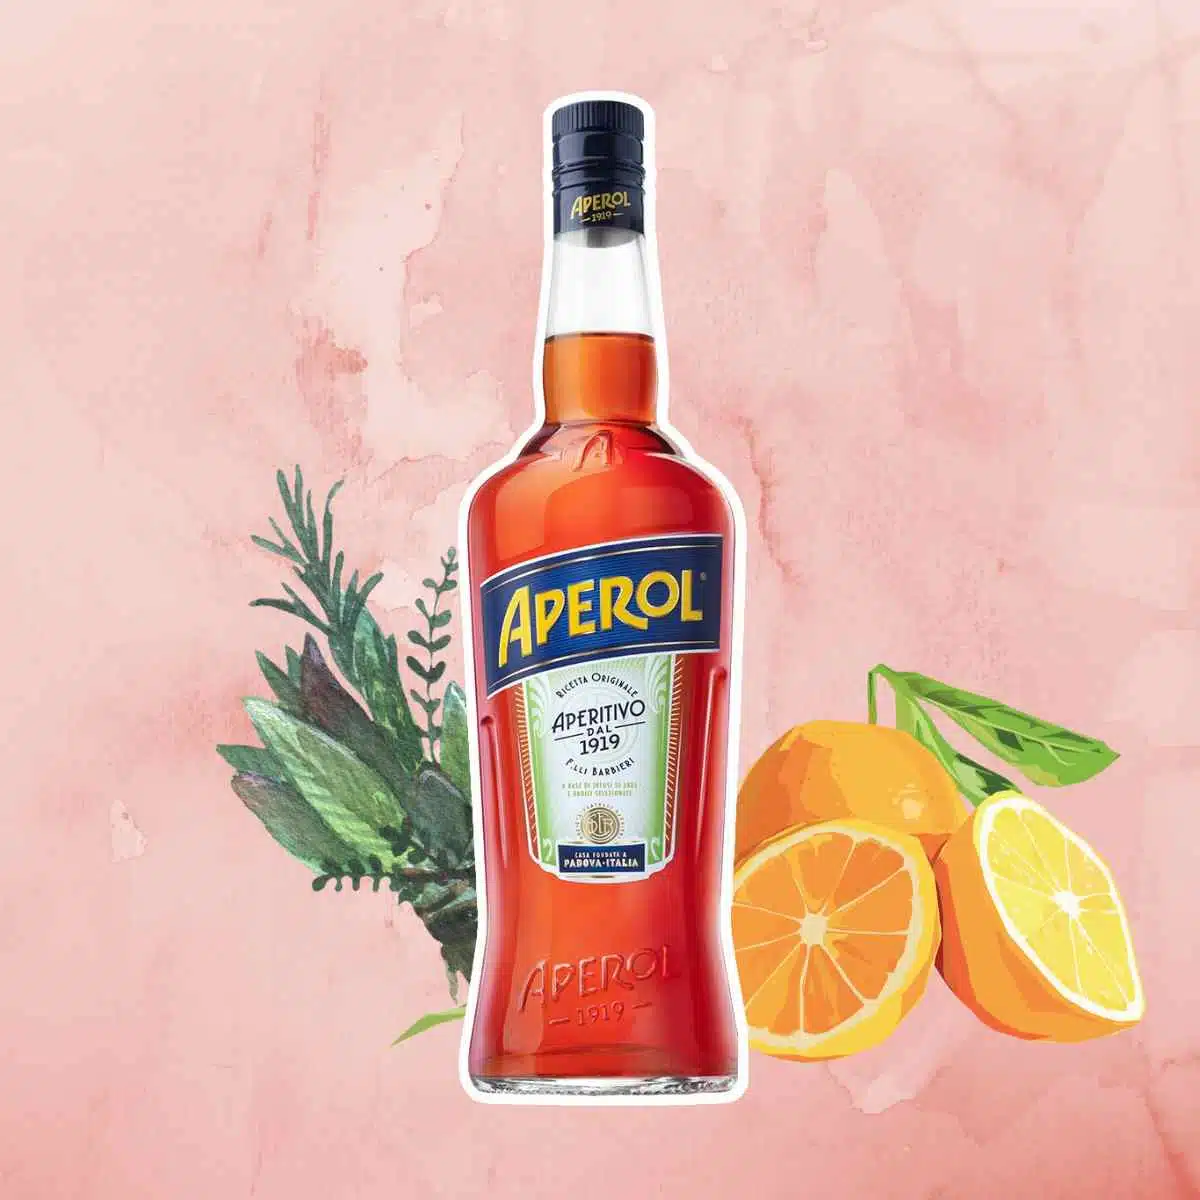 What is Aperol?